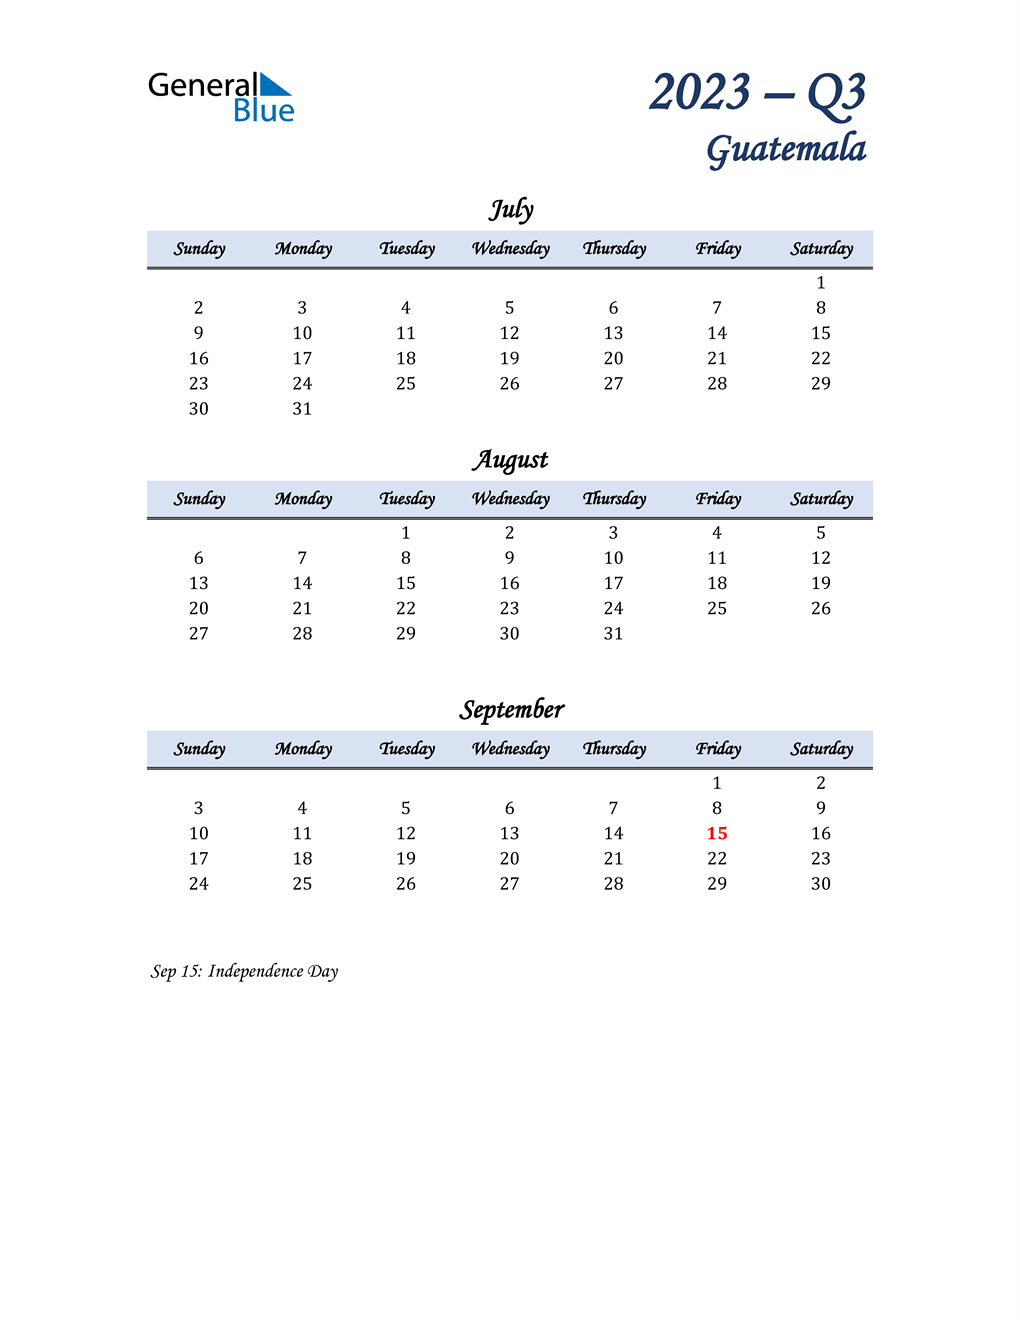  July, August, and September Calendar for Guatemala